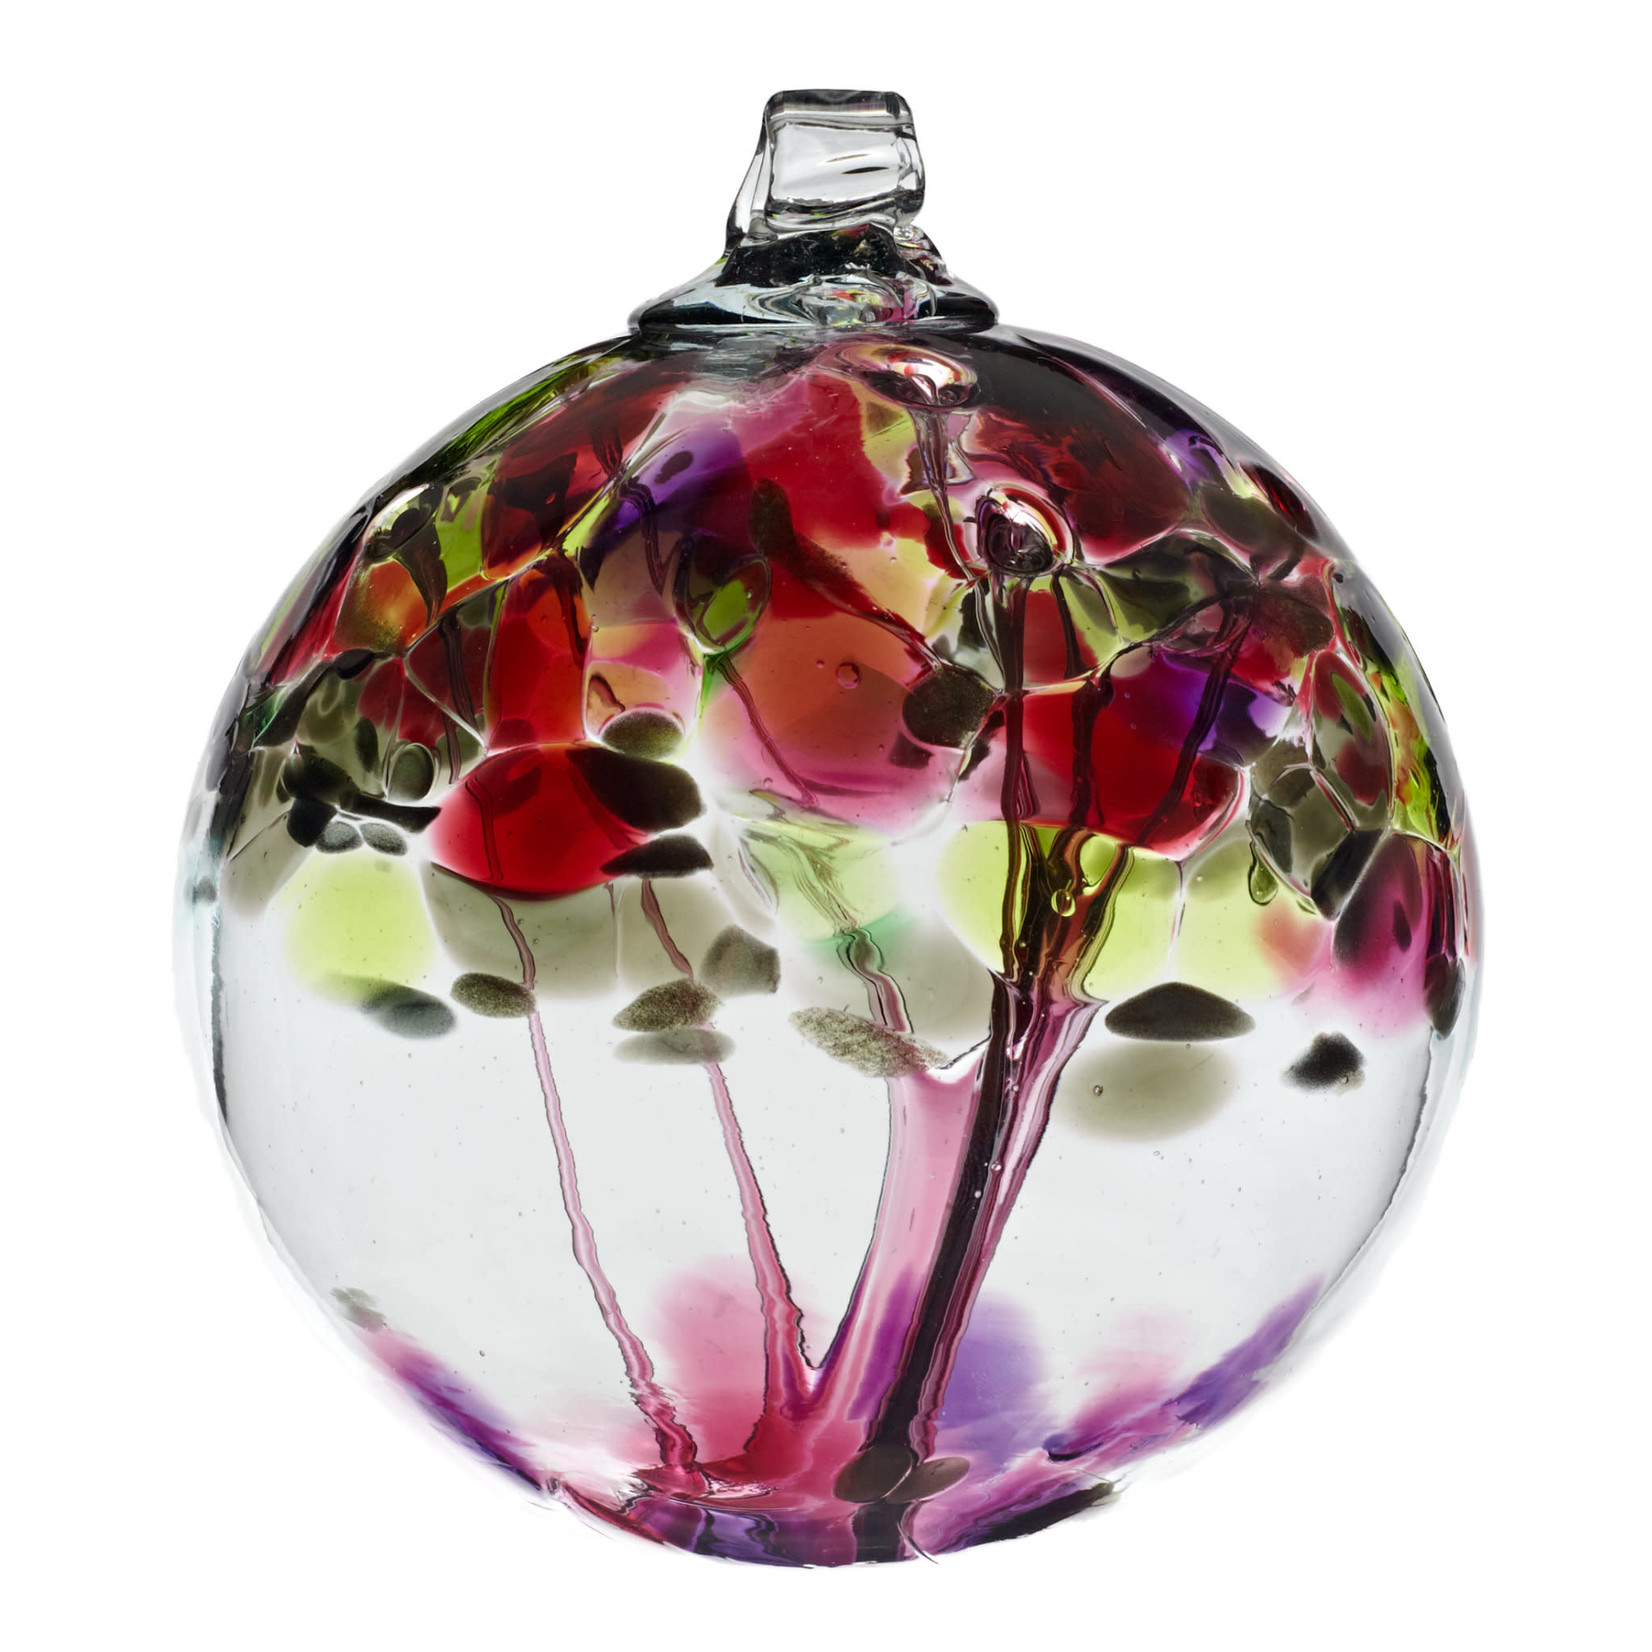 KITRAS 6" TREE OF ENCHANTMENT HANGING GLASS BALL - WISHES